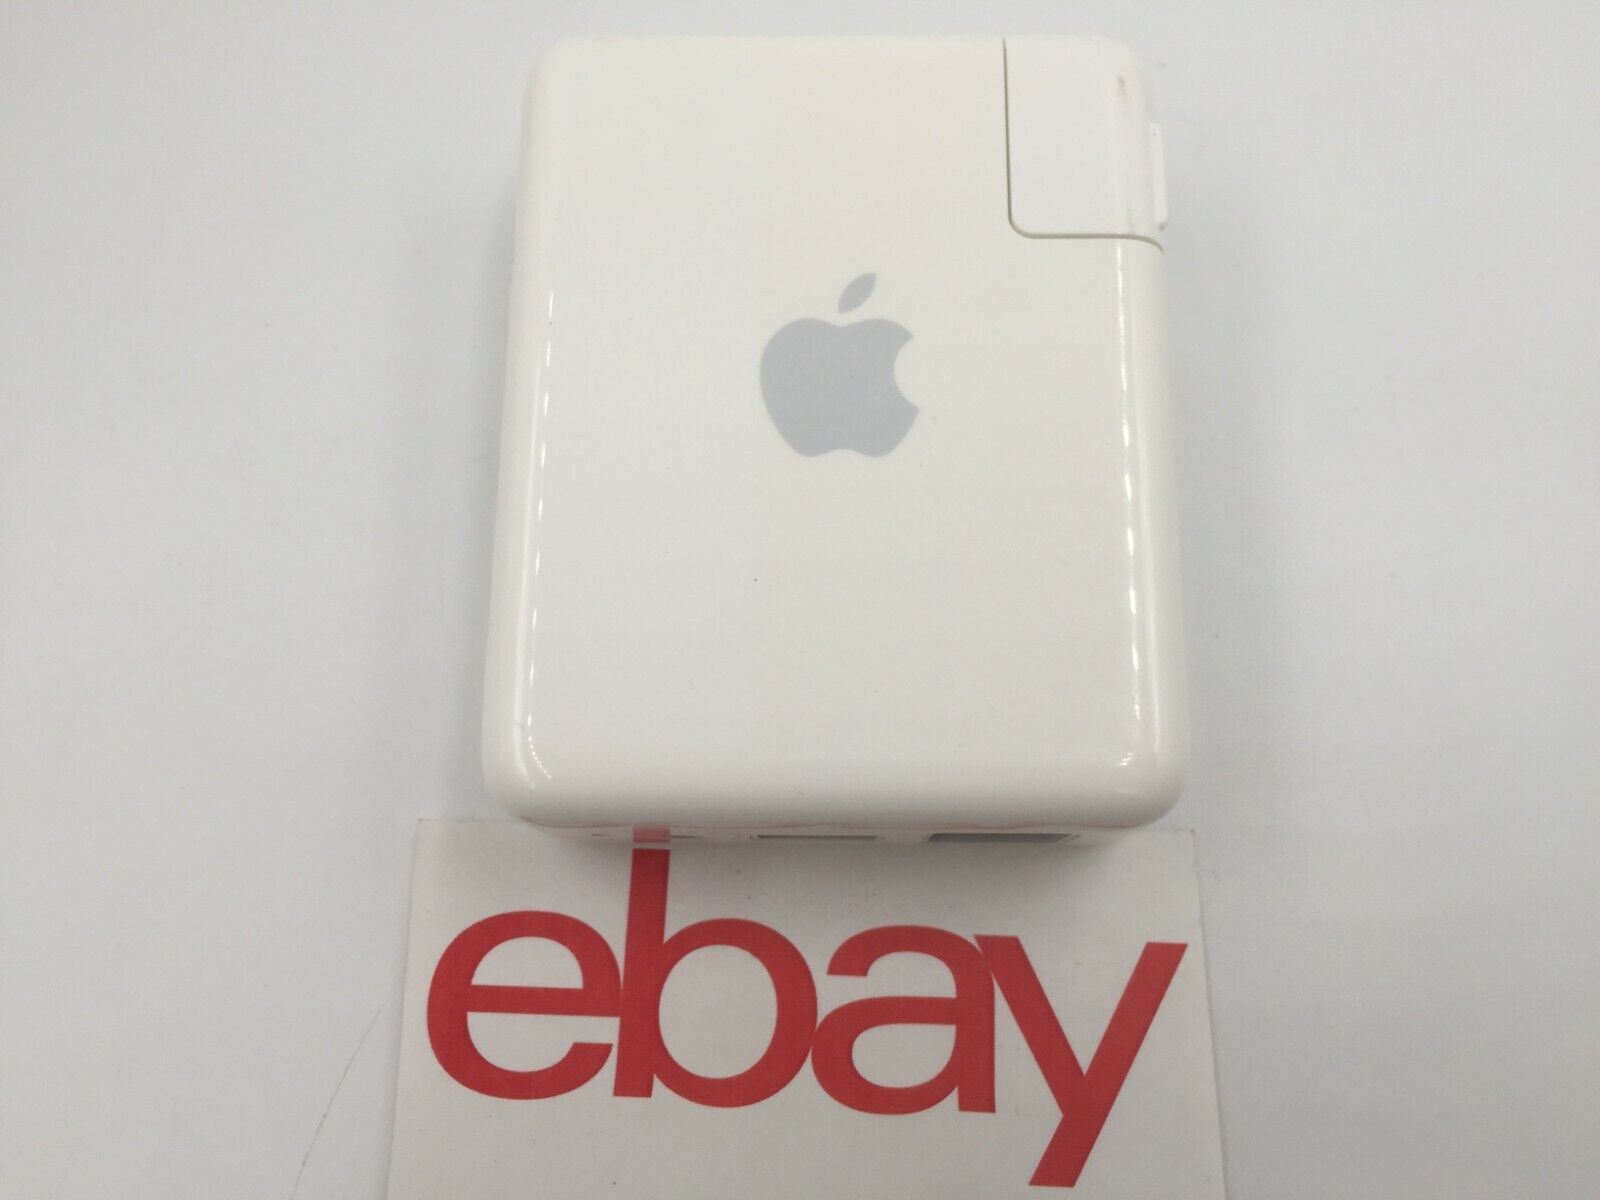 GENUINE Apple Airport Express A1264 54 Mbps 10/100 Wireless N Router (MB321LL/A)